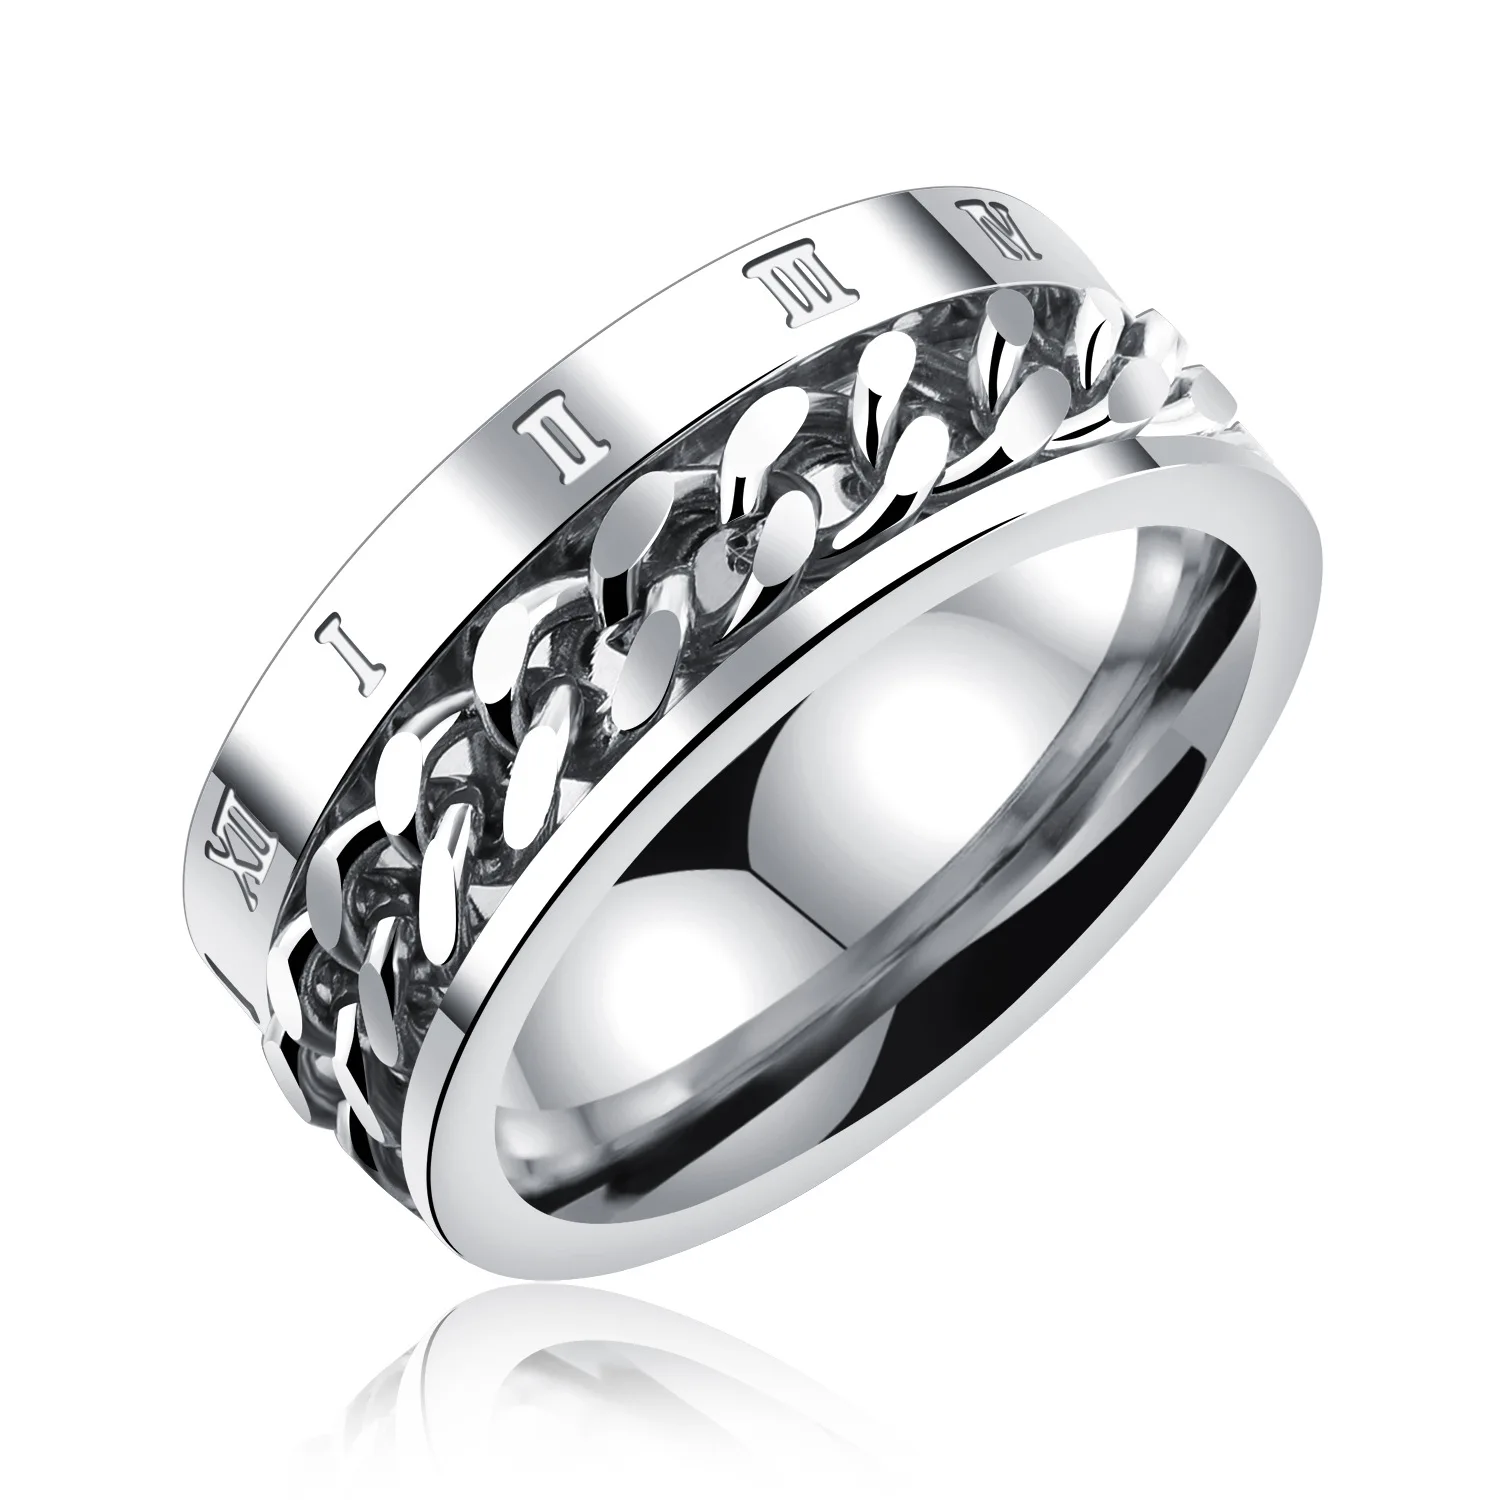 

Roman Numerals Chain Rotatable Fashion Jewelry Silver Stainless steel Rings Men